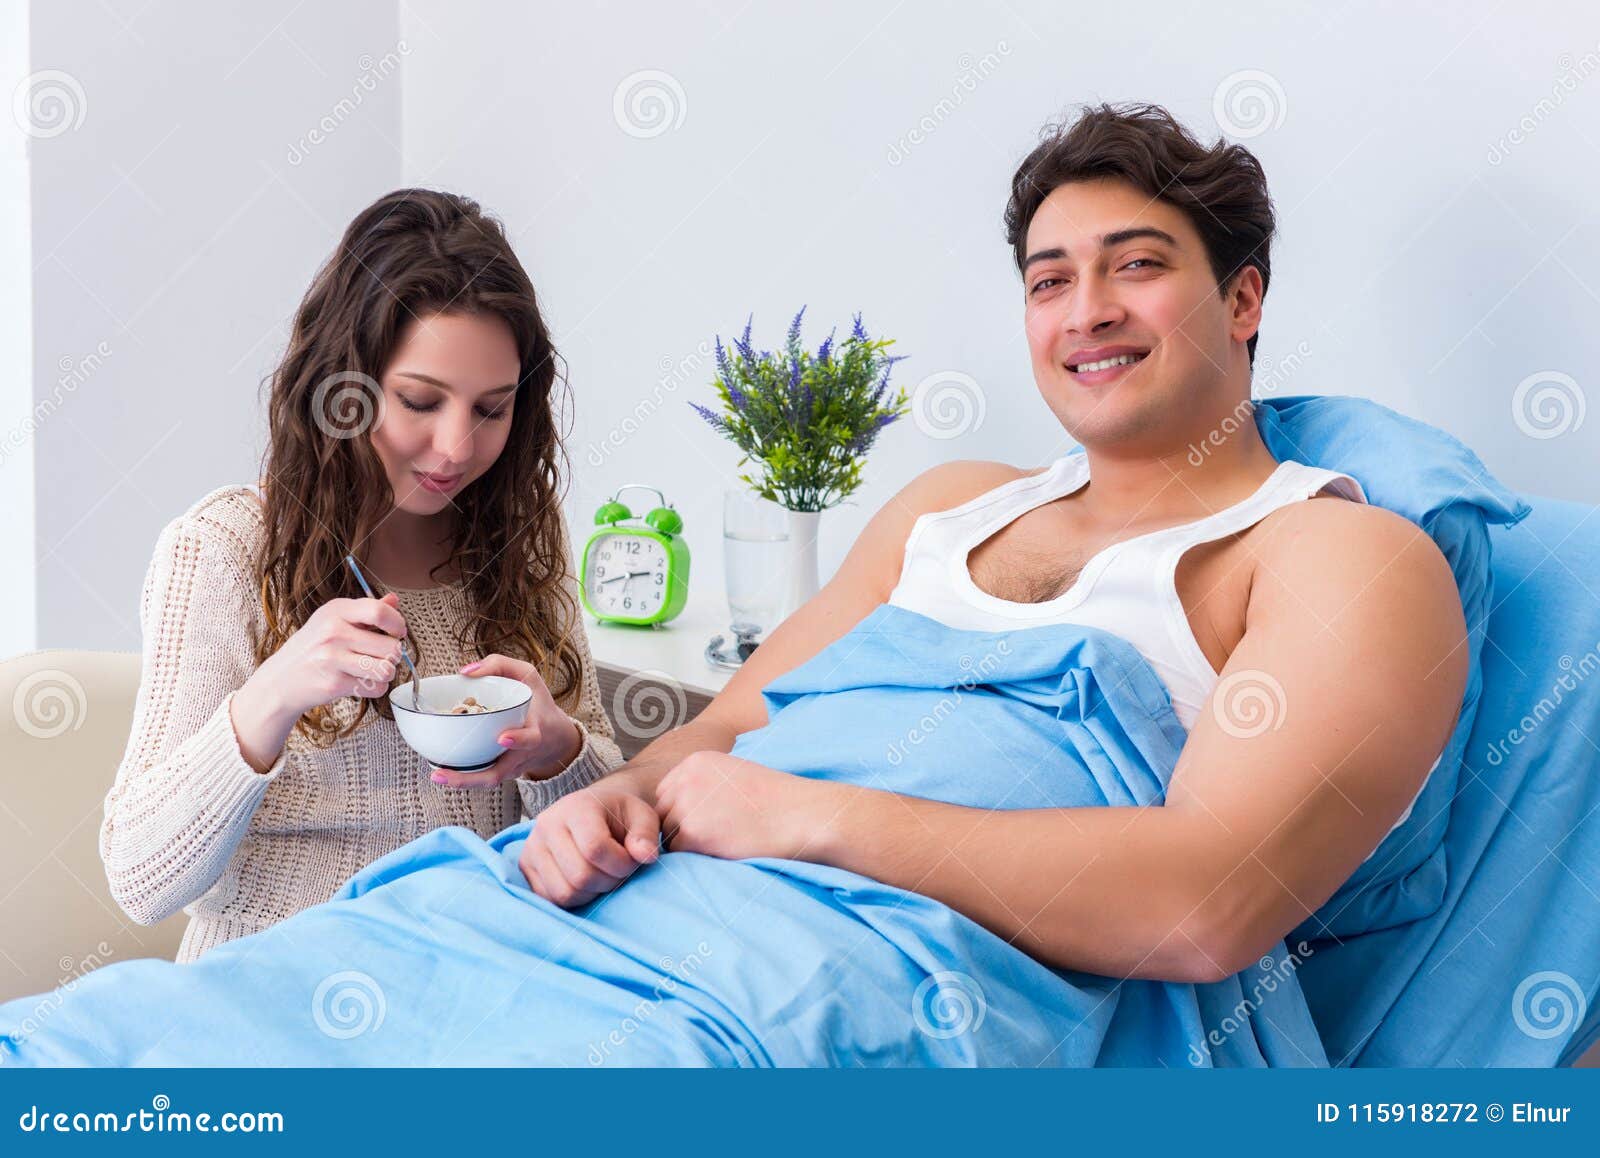 The Wife Visiting Ill Husband In The Hospital Room Stock Photo picture